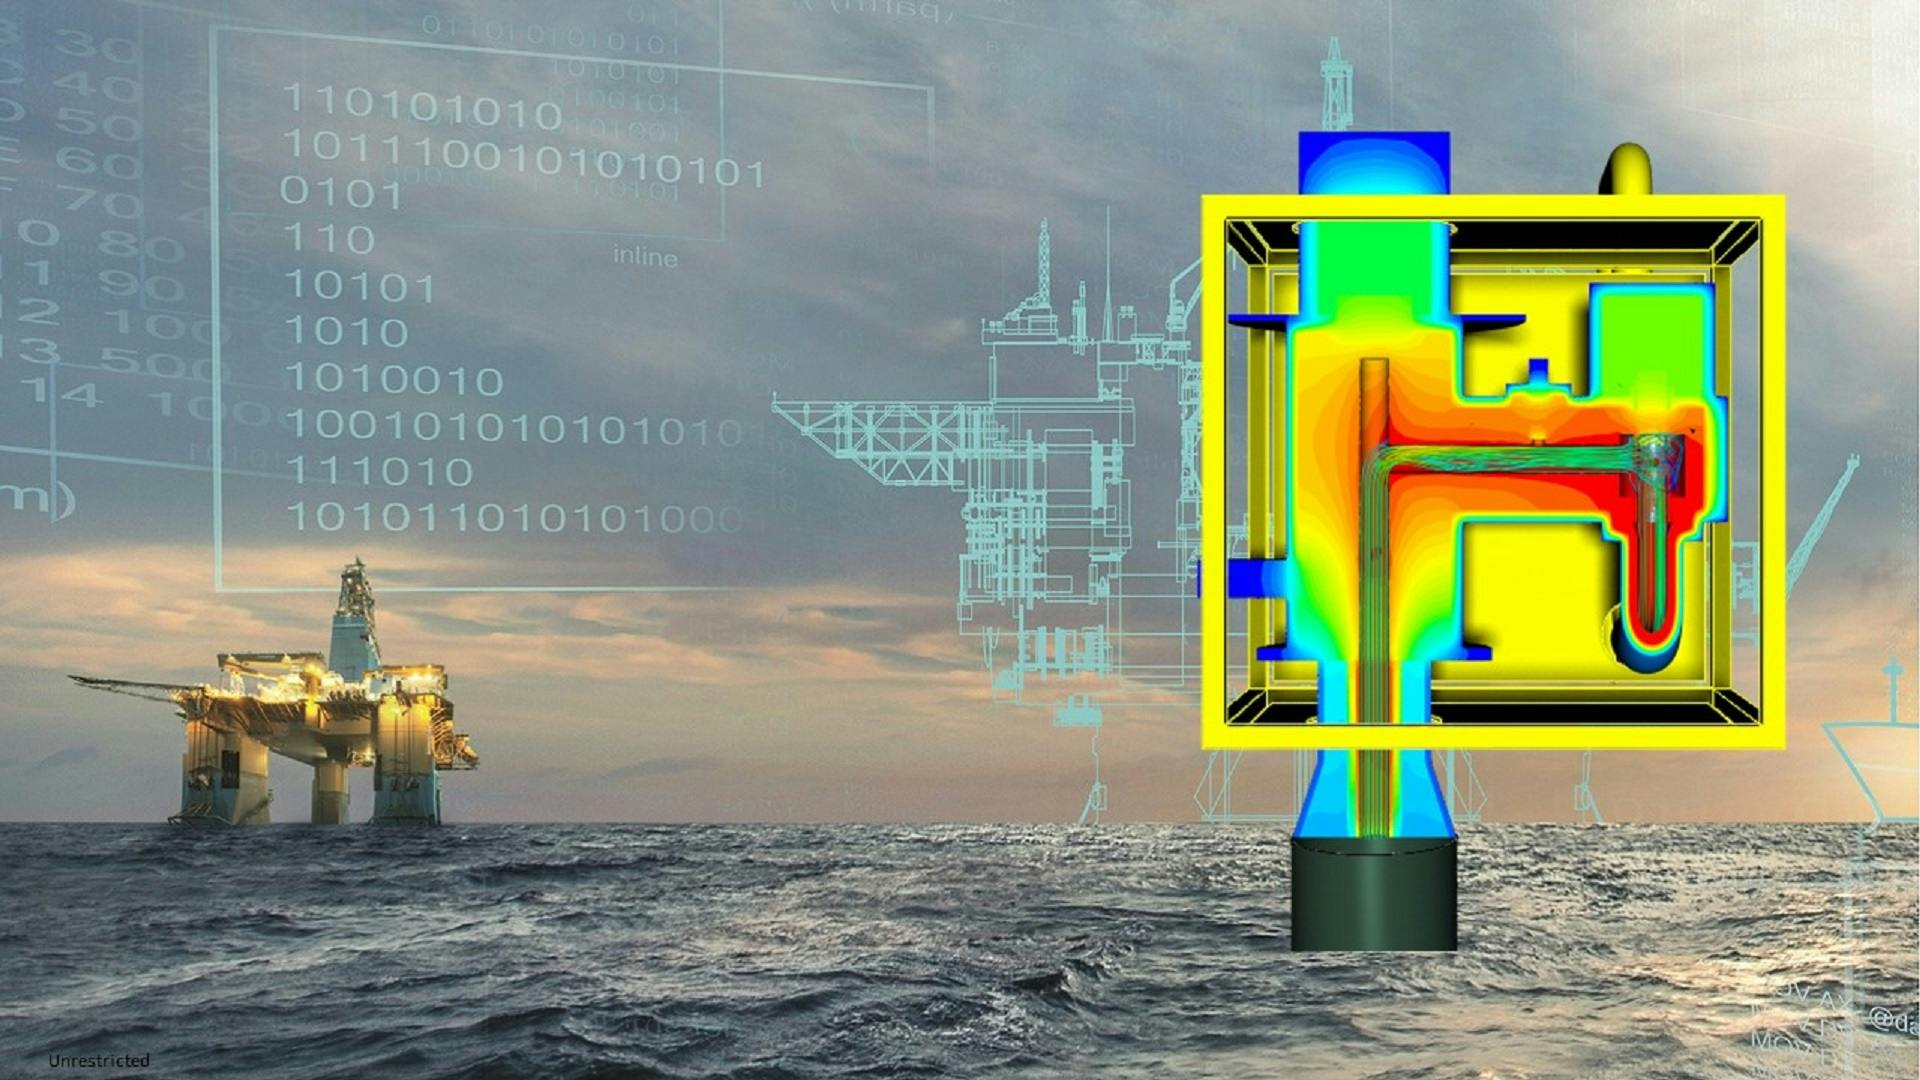 Structural Integrity in Oil & Gas: Why we need fluid flow simulation